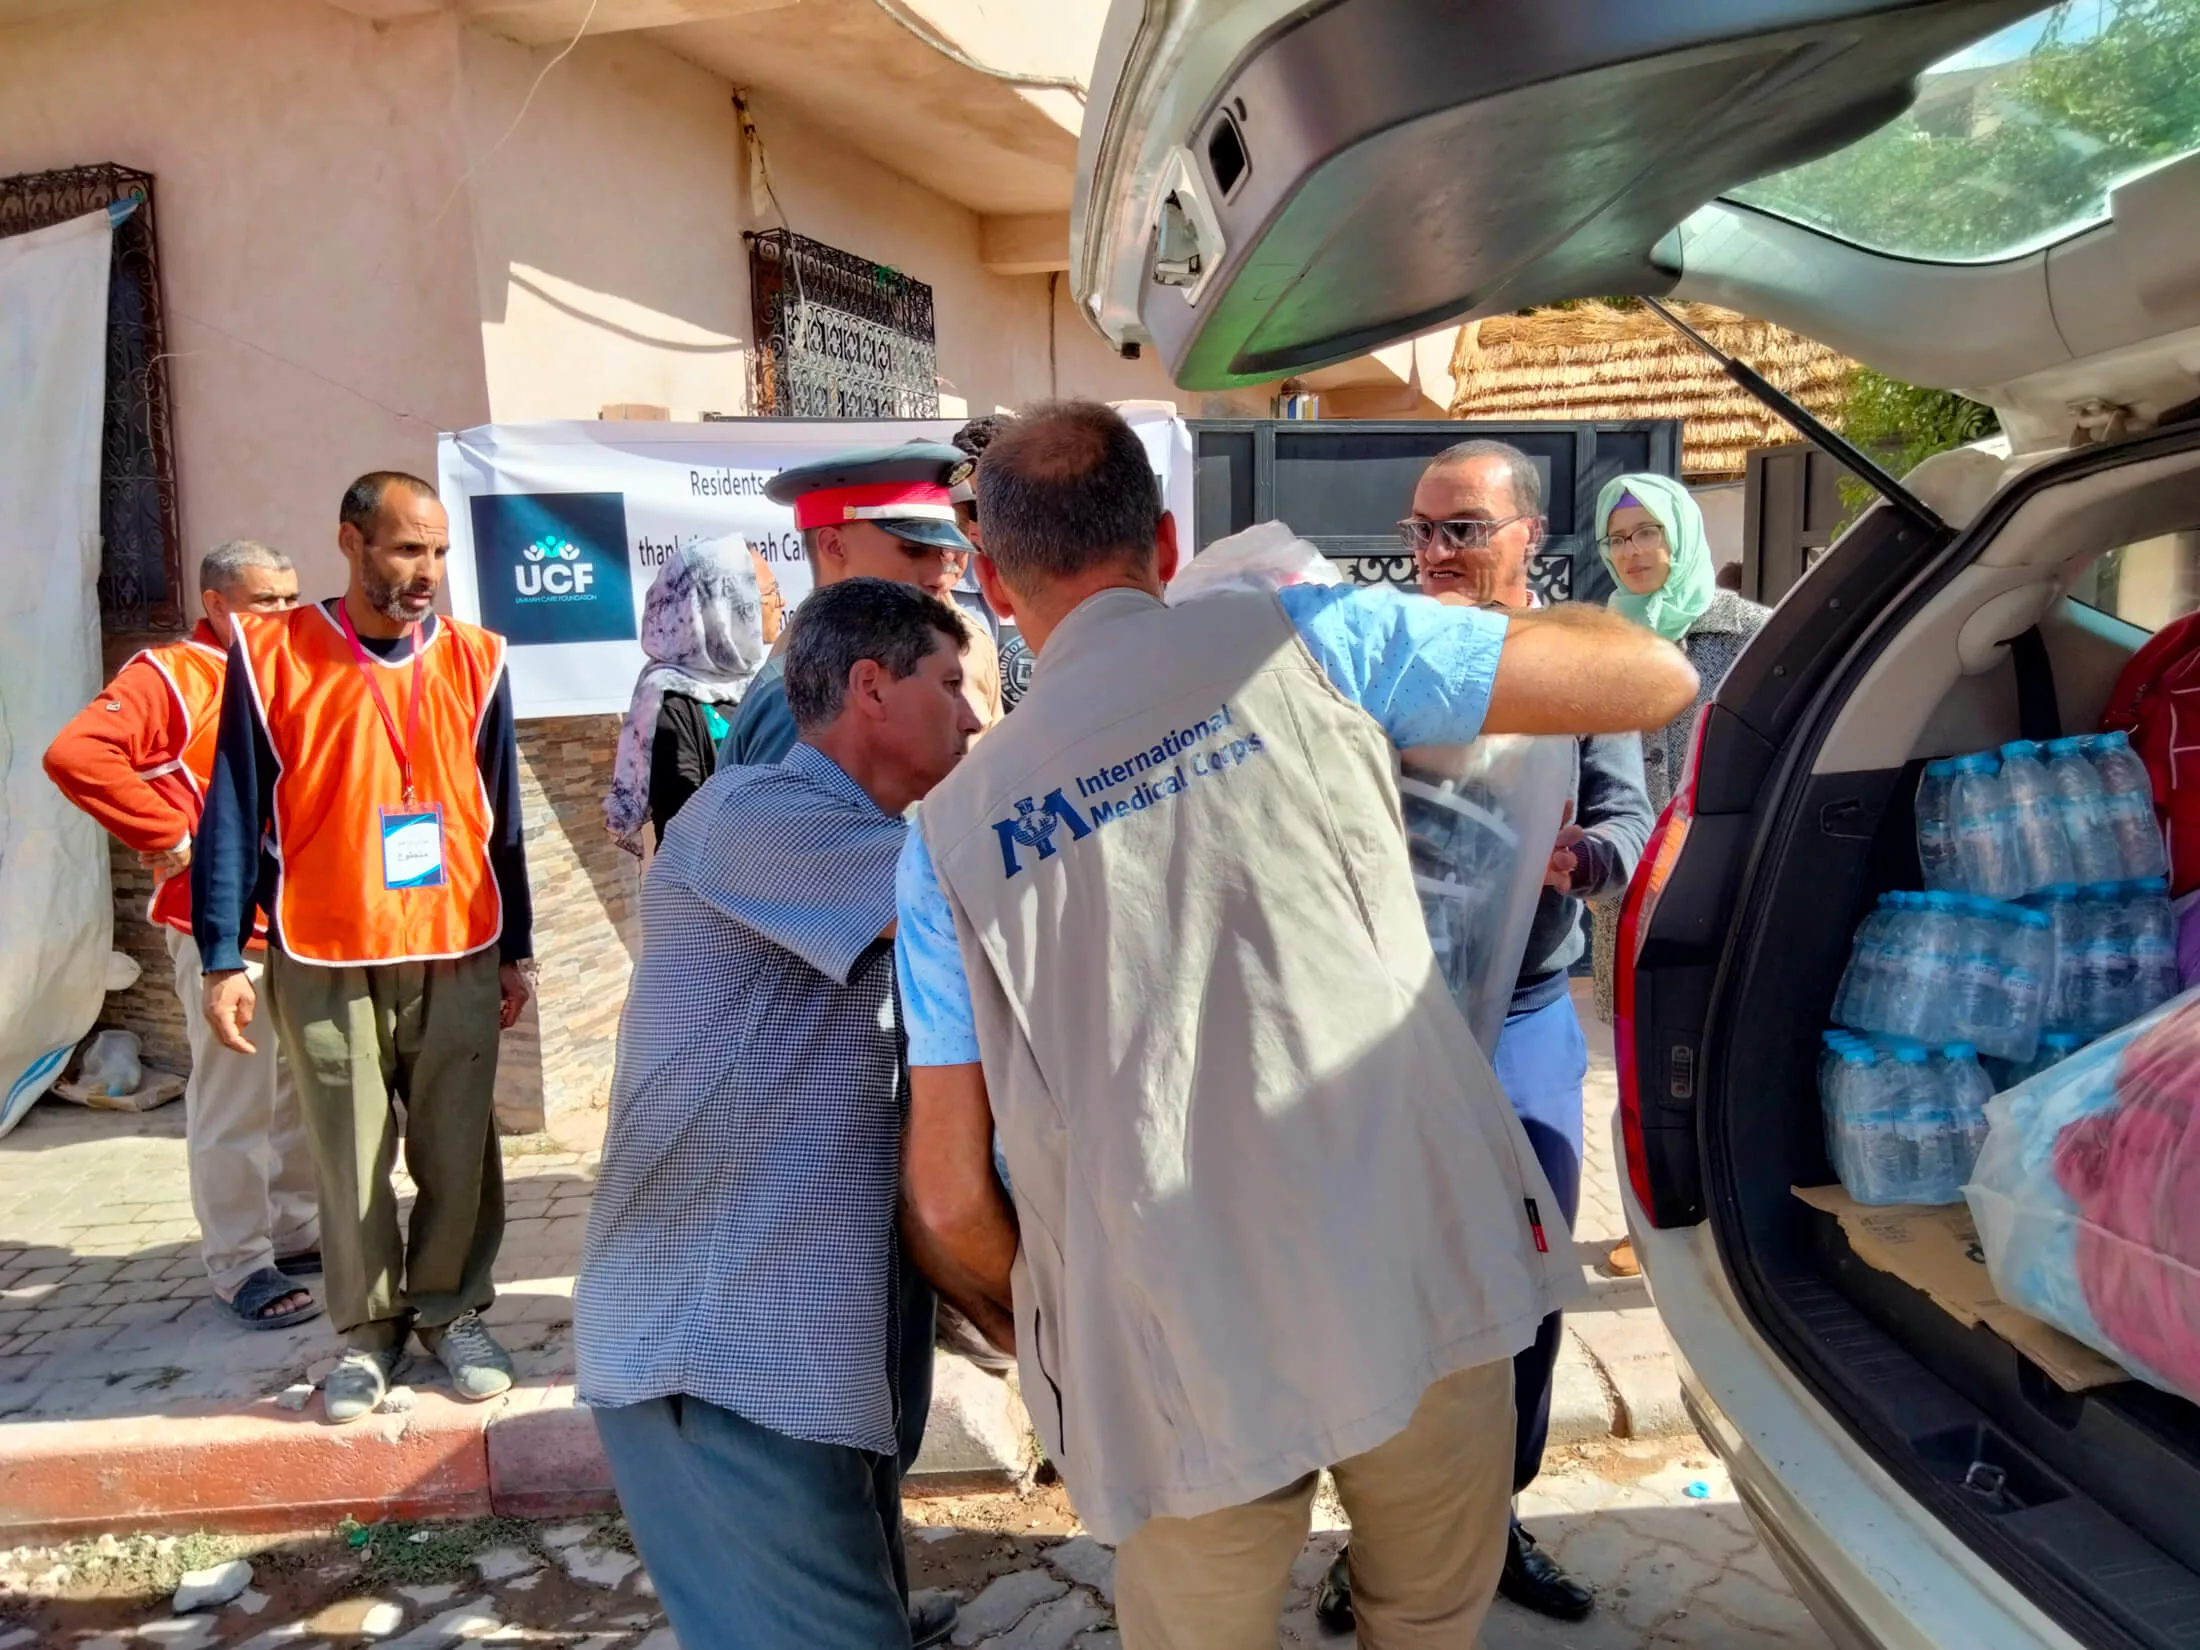 International Medical Corps' emergency response in Morocco following the devastating earthquakes.